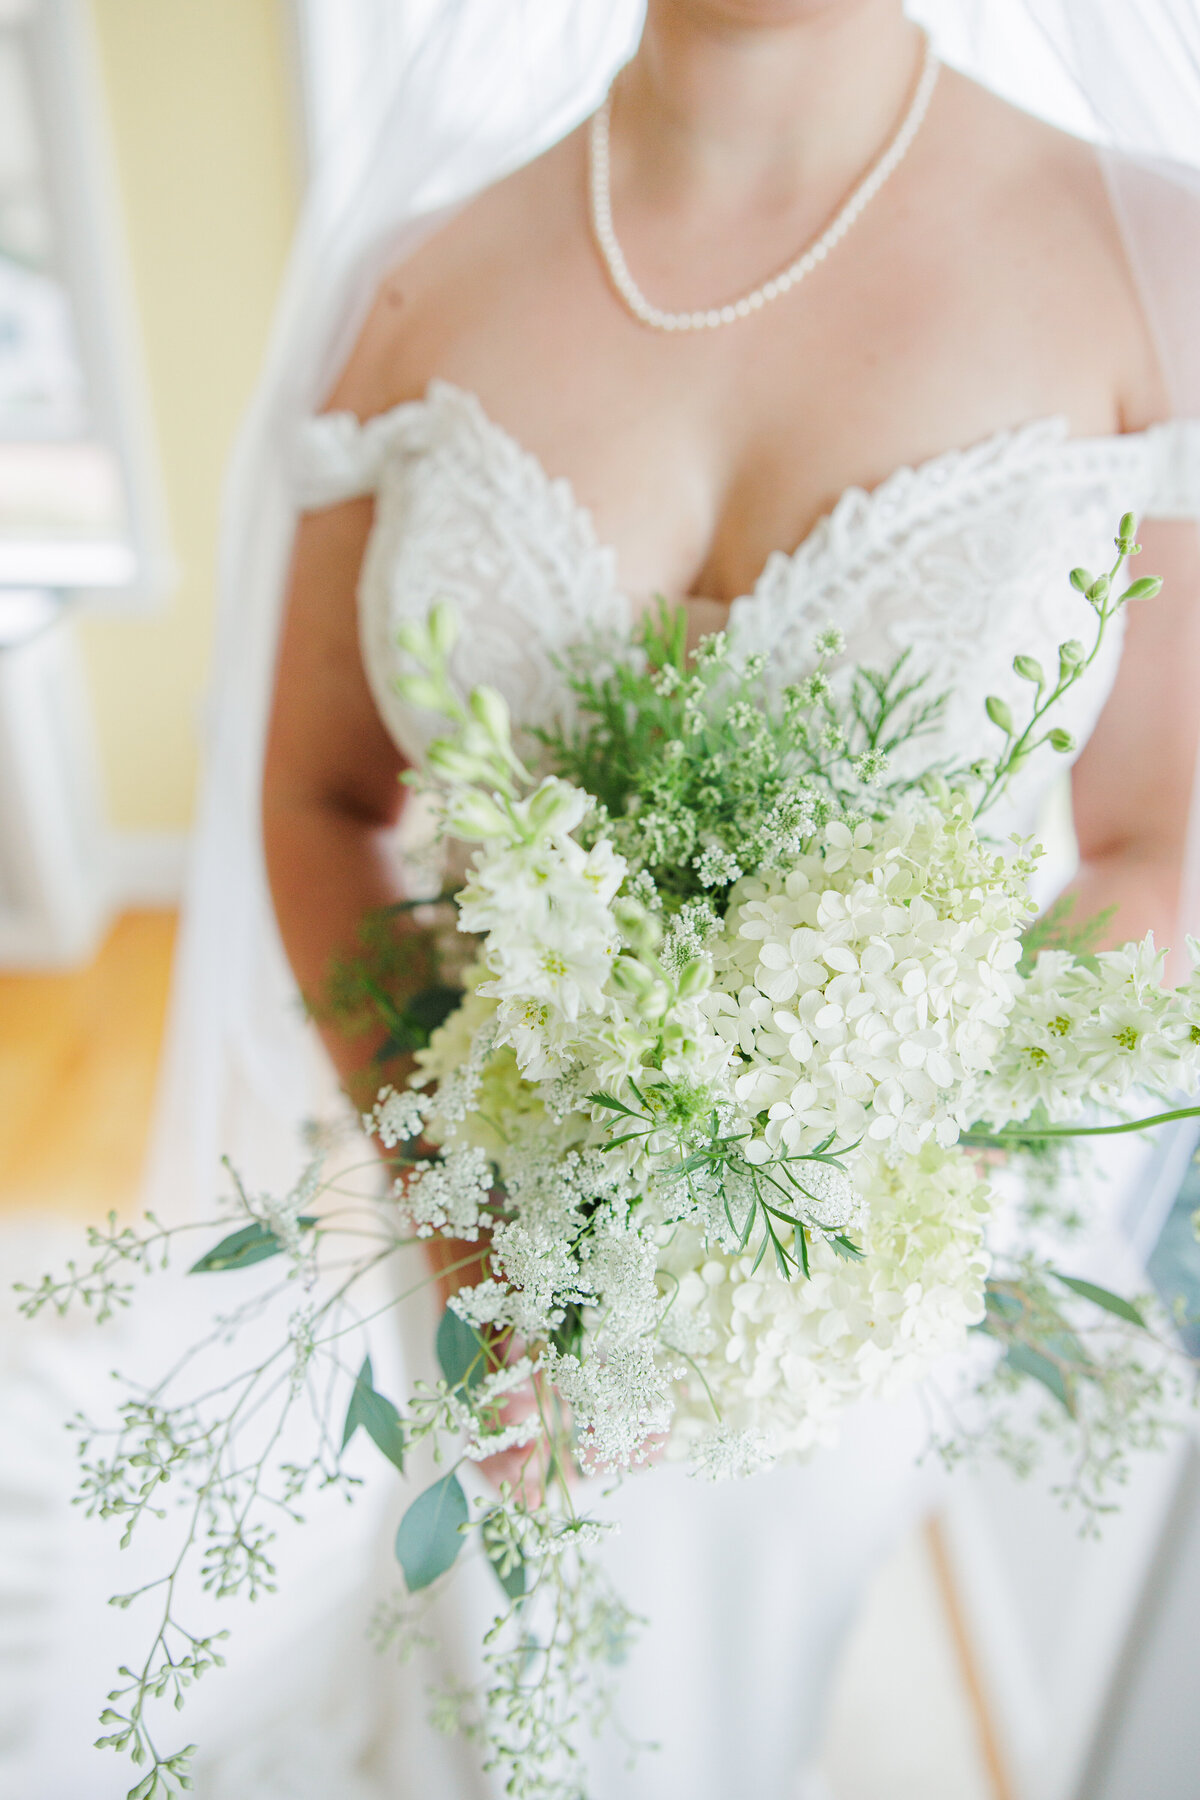 Closeup of a bride holding a white floral bouquet representing the timeless wedding details Christine Hazel Photography documents